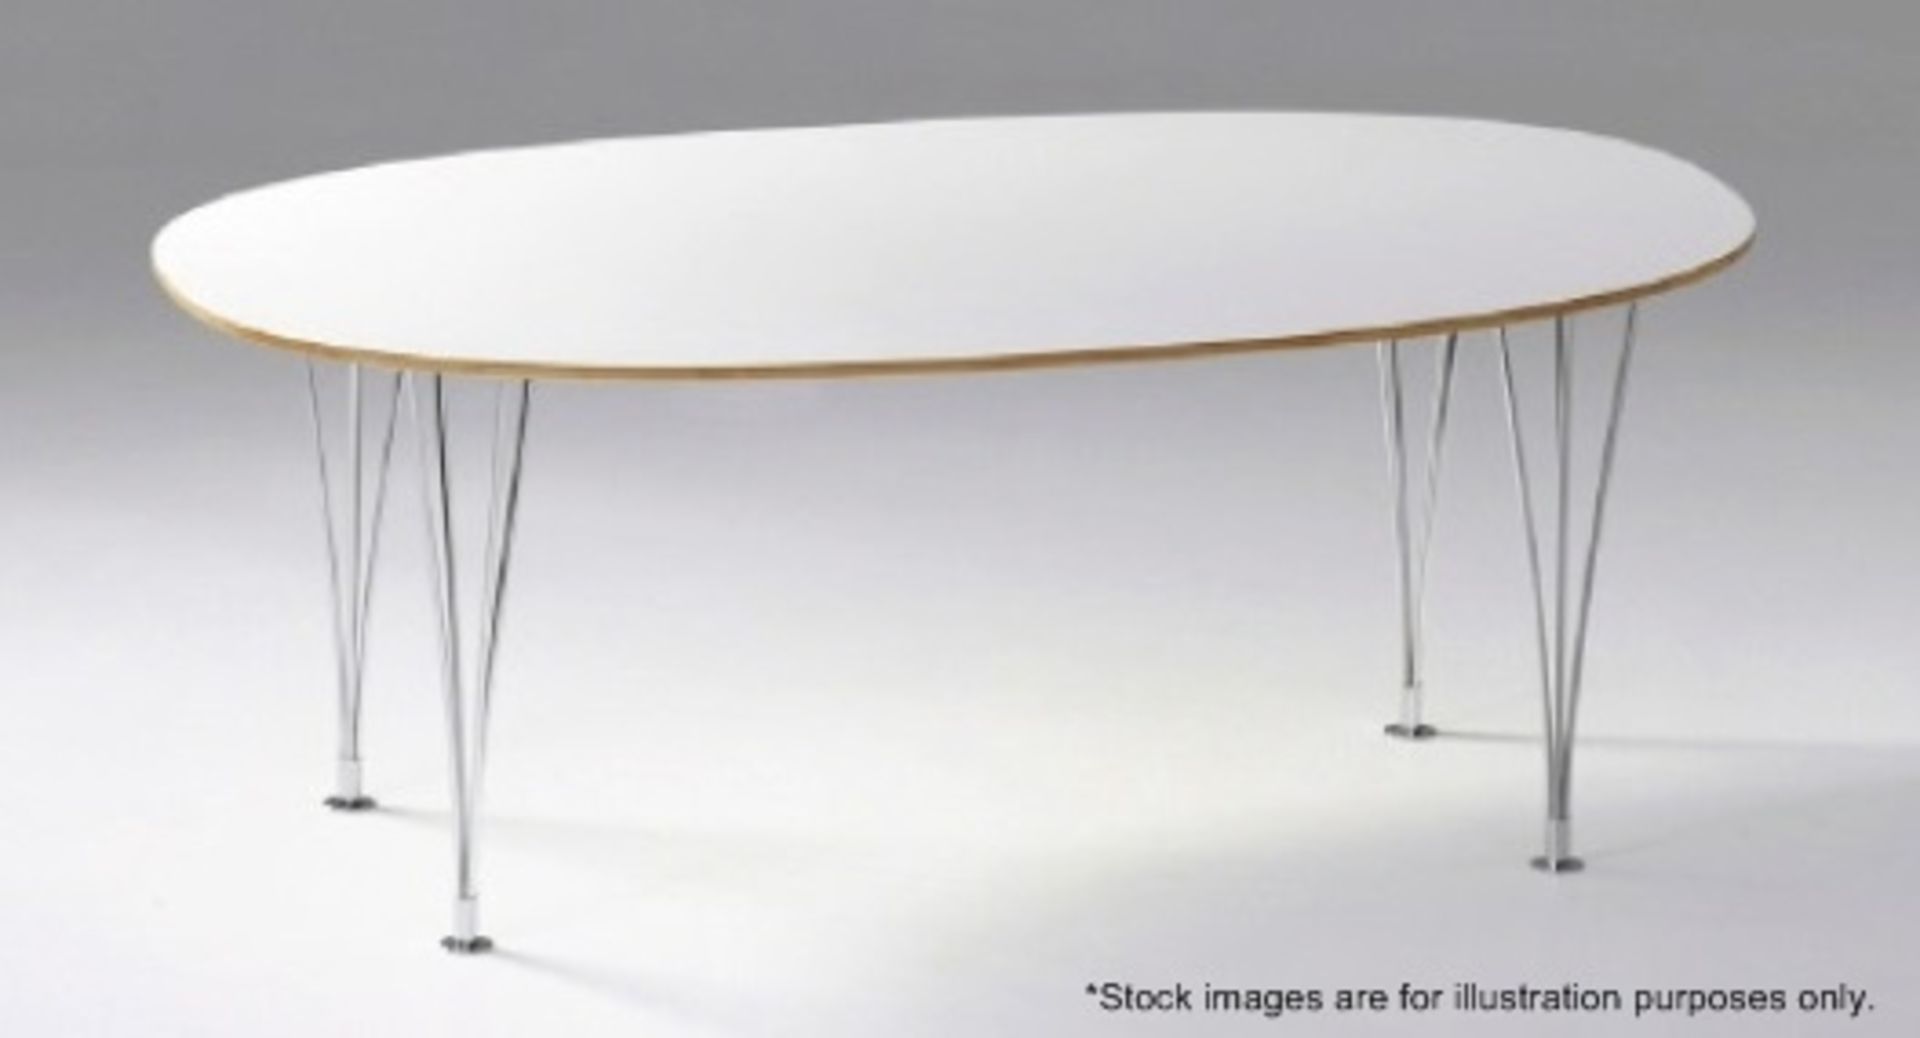 1 x FREEFORM Piet / Hansen Inspired Super Ellispe-Style 220cm Dining Table In White With Metal - Image 2 of 2